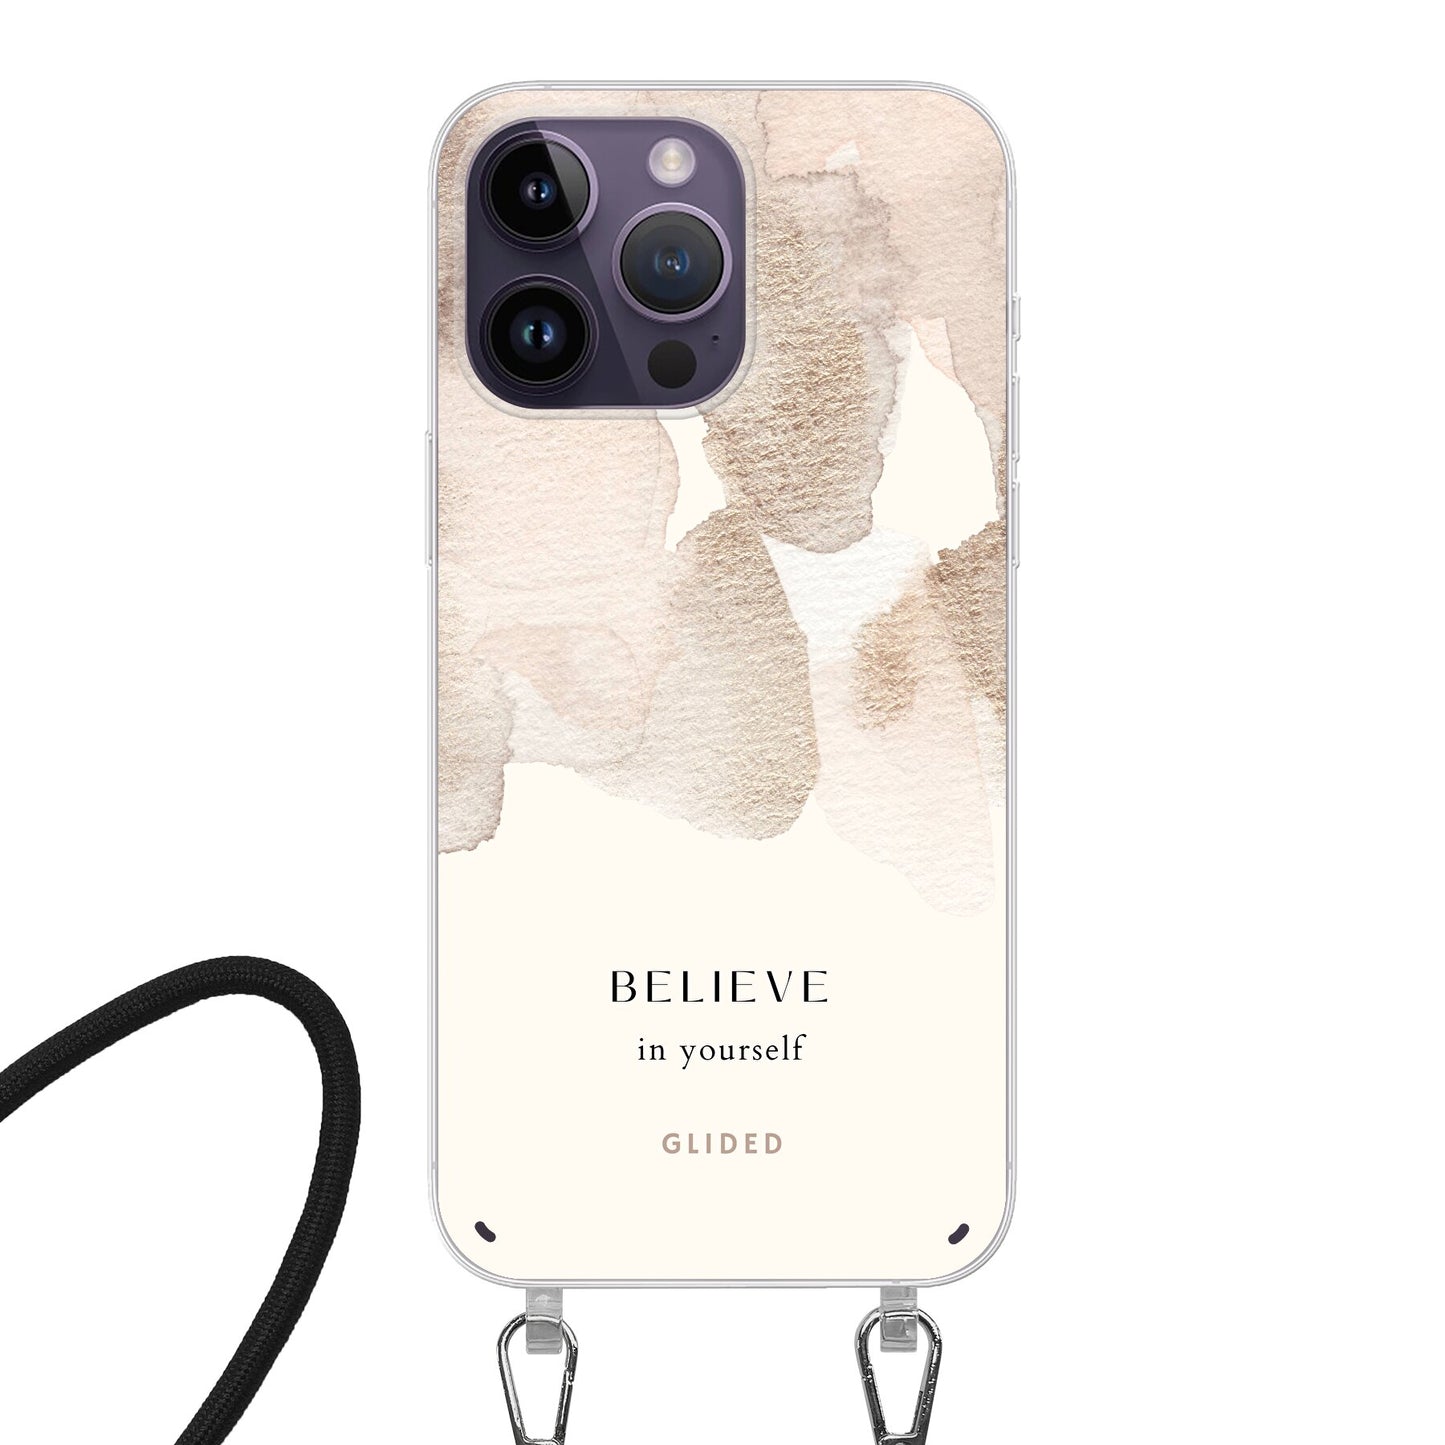 Believe in yourself - iPhone 14 Pro Handyhülle Crossbody case mit Band